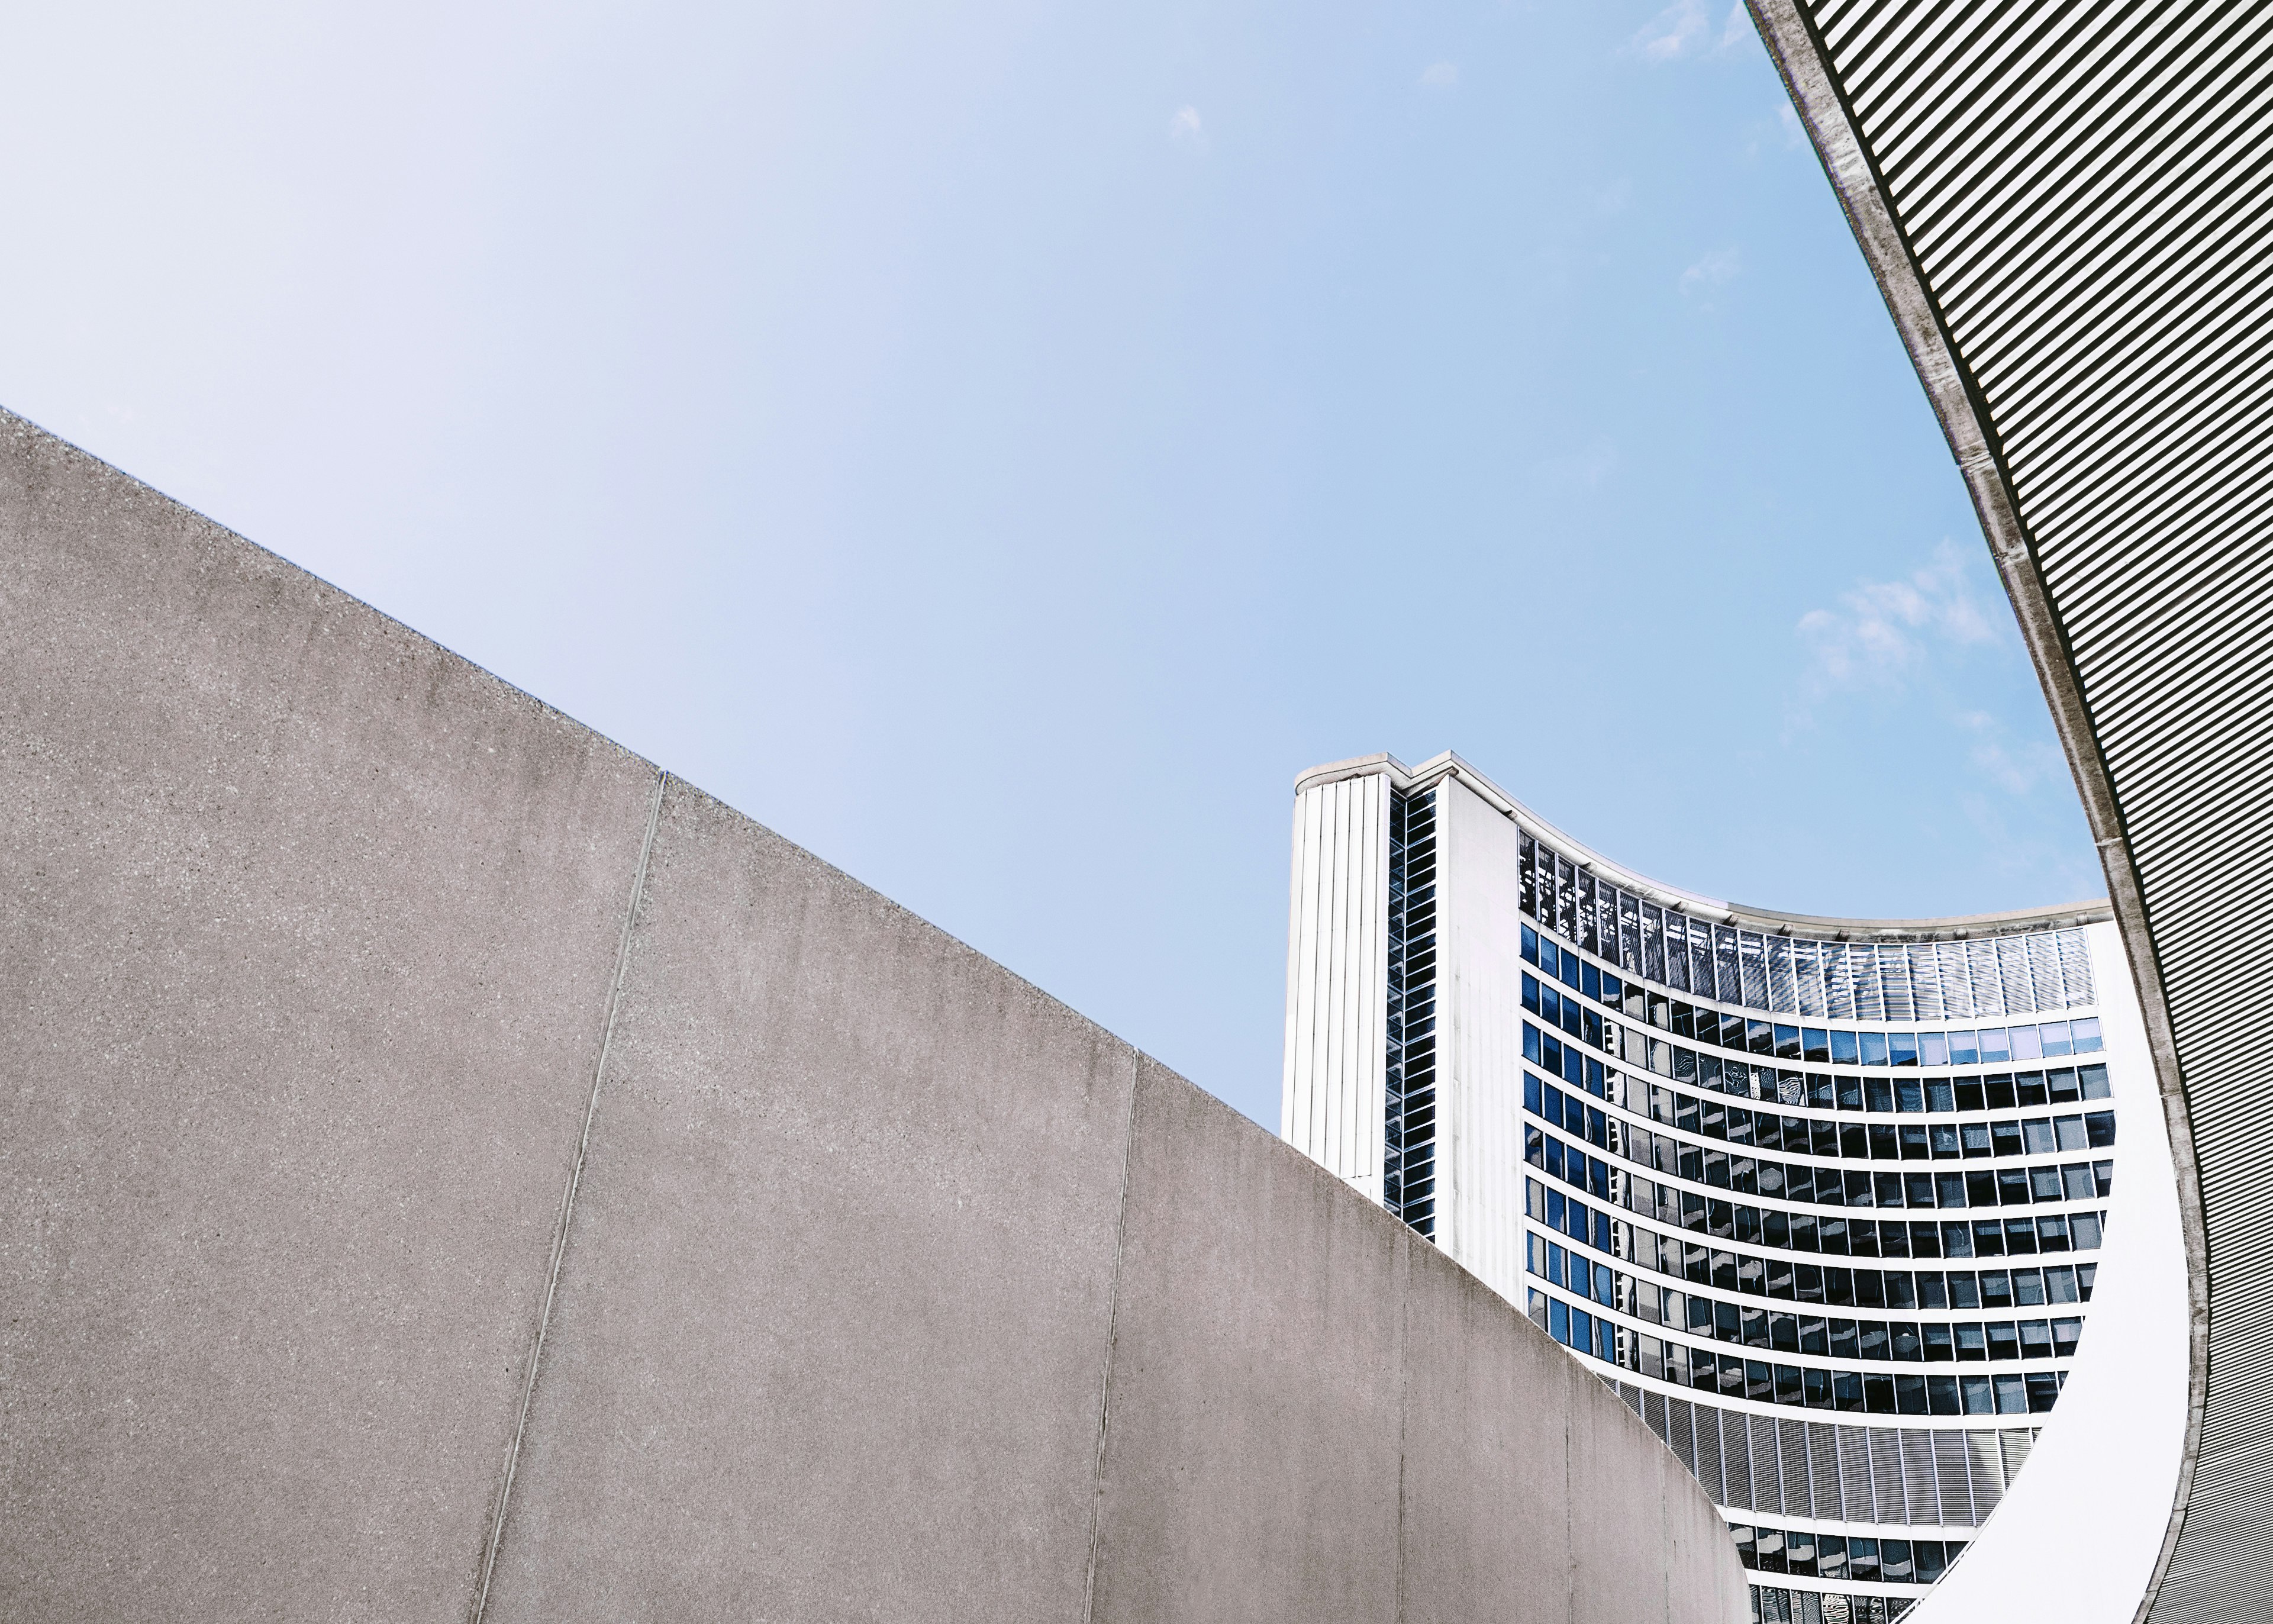 Concrete walls near the curved building of Toronto City Hall